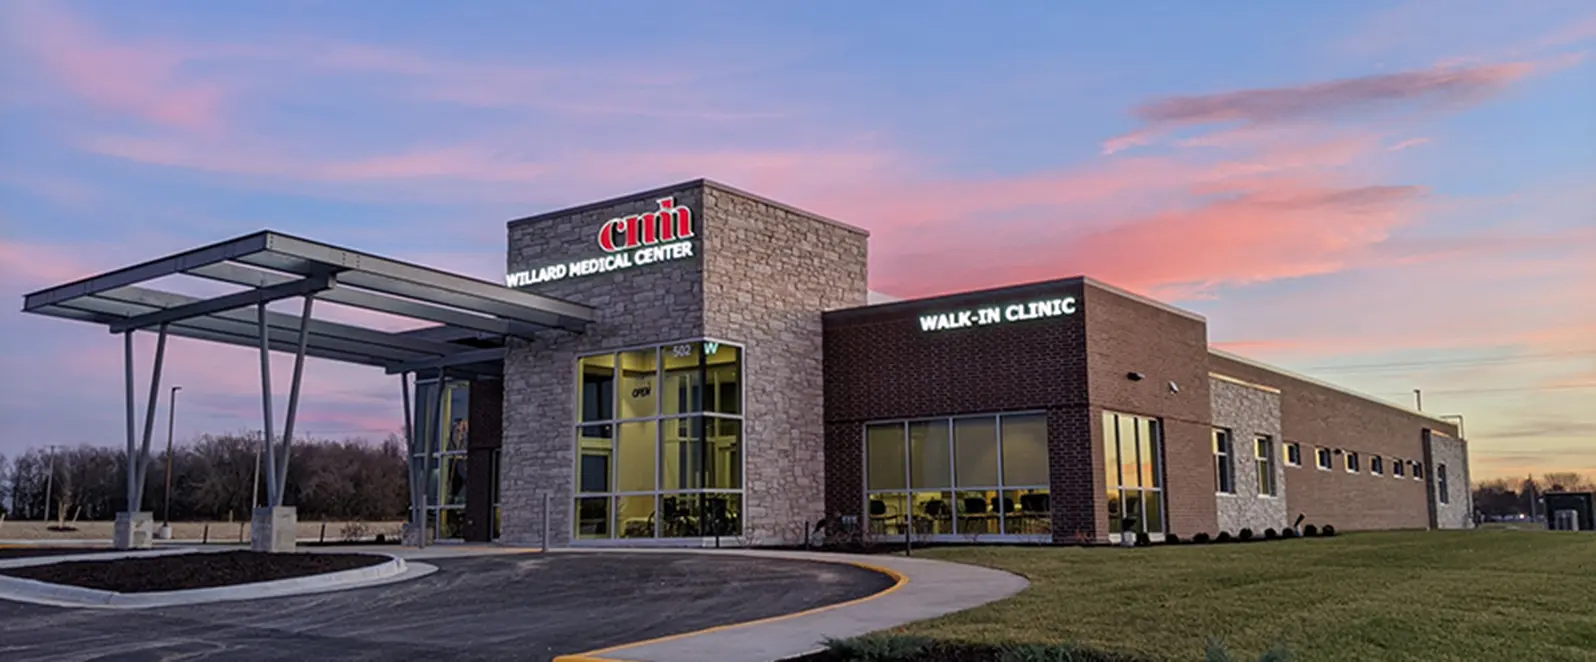 Willard Medical Center and Walk‑In Clinic building exterior